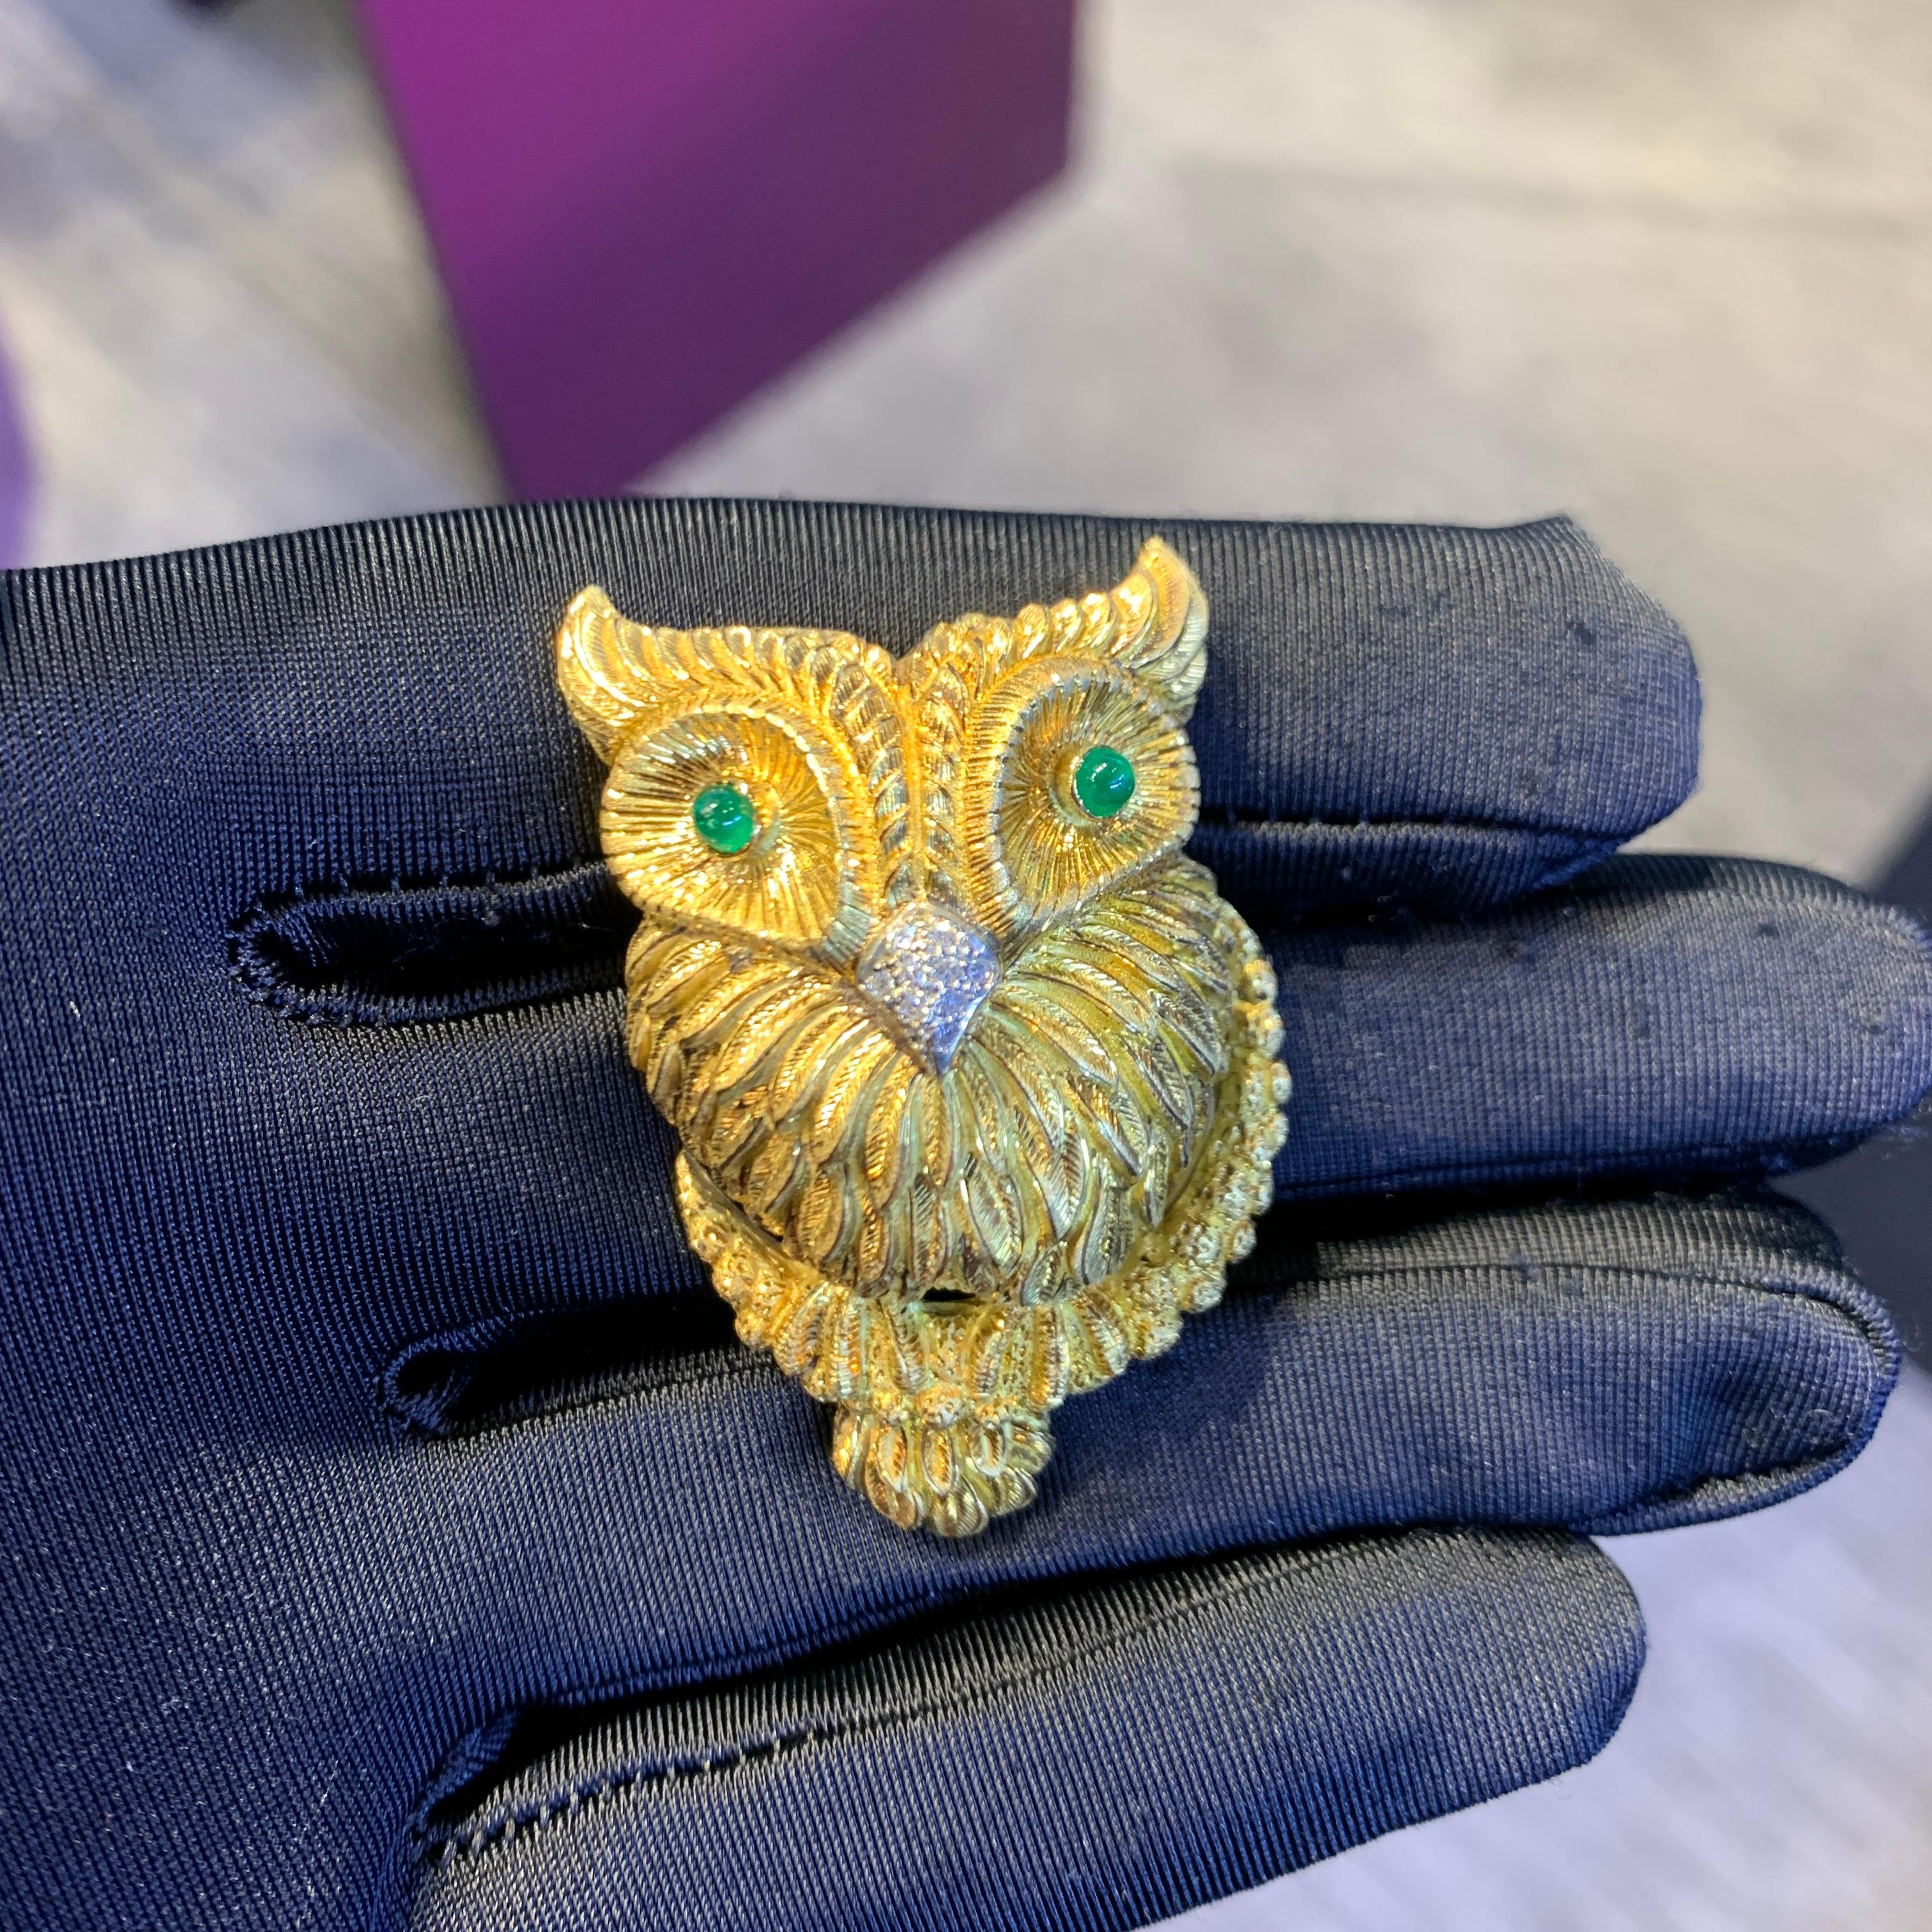 Cartier Owl Brooch

An 18 karat yellow gold brooch with an owl motif set with 2 cabochon emeralds for eyes and 10 round cut diamonds for its beak

Signed Cartier Italy and numbered

Measurments: 1.88